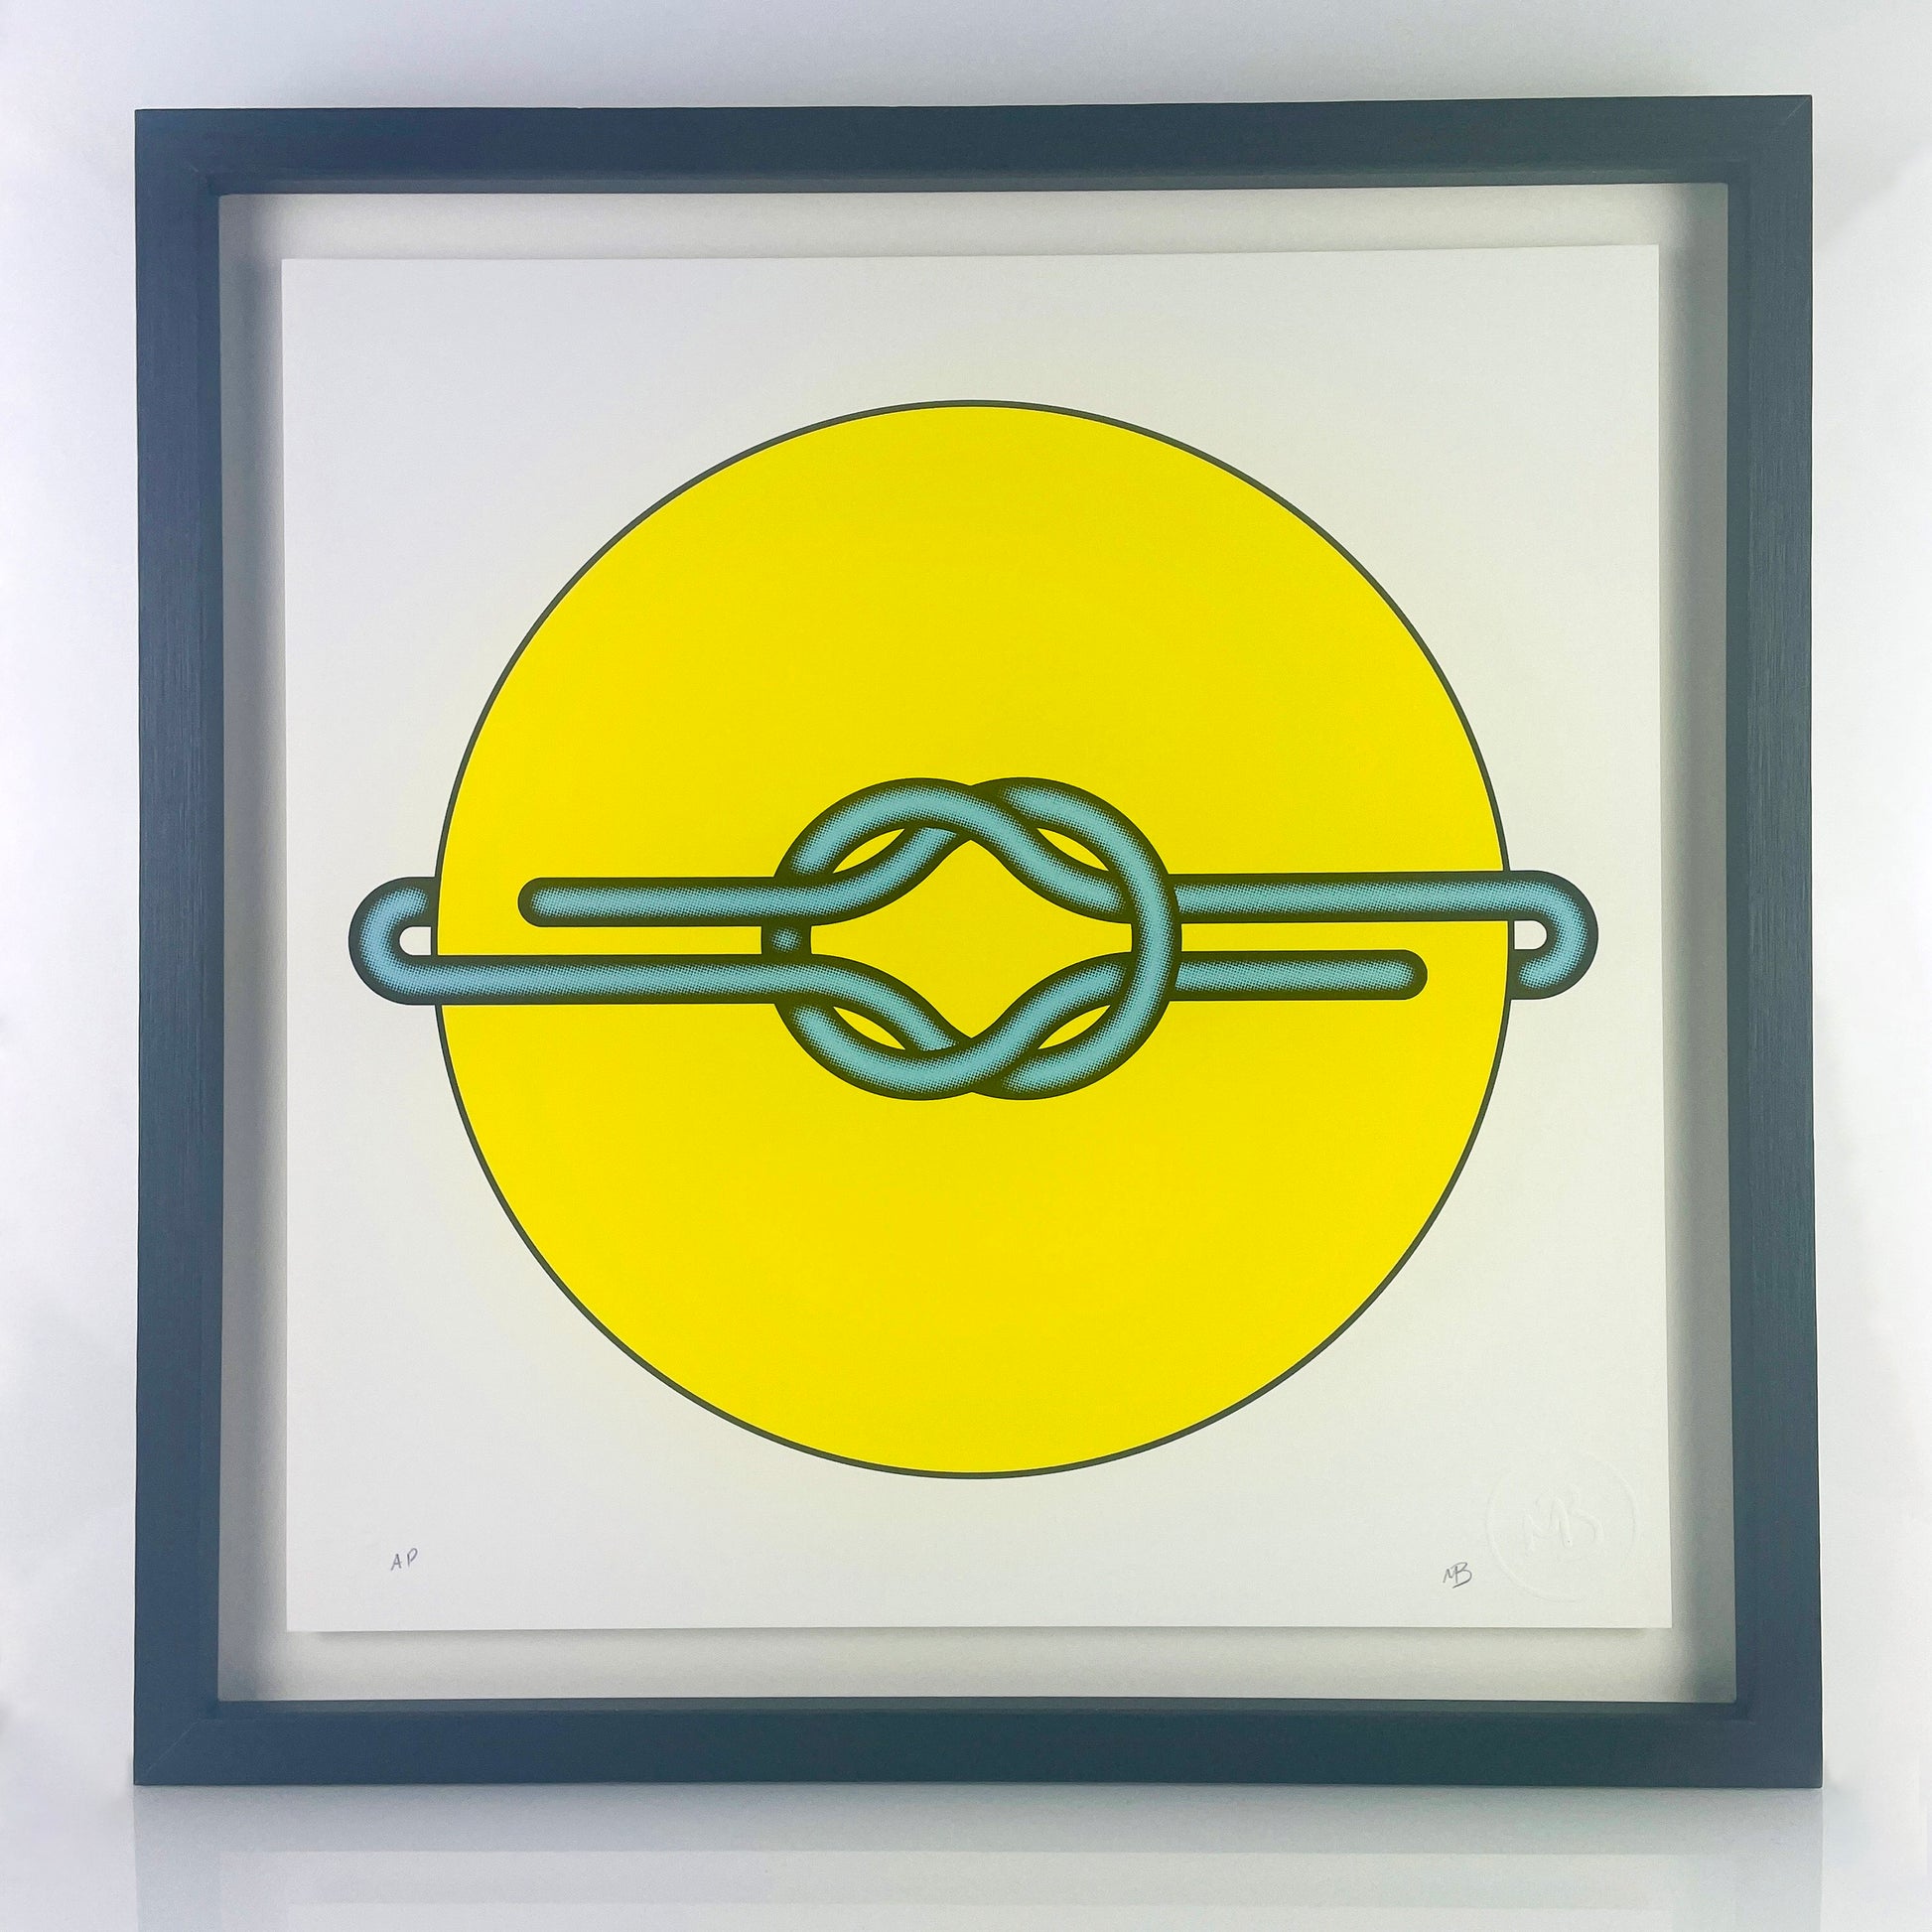 Immerse your space in the vibrant charm of Mark Beattie's Love Knot (Blue in Yellow). This limited edition 3-color screenprint on Somerset satin white 410gsm paper, measuring 40 x 40cm, is part of an exclusive edition of 10. Explore the dynamic interplay of colors and forms, where artistic precision meets limited edition exclusivity